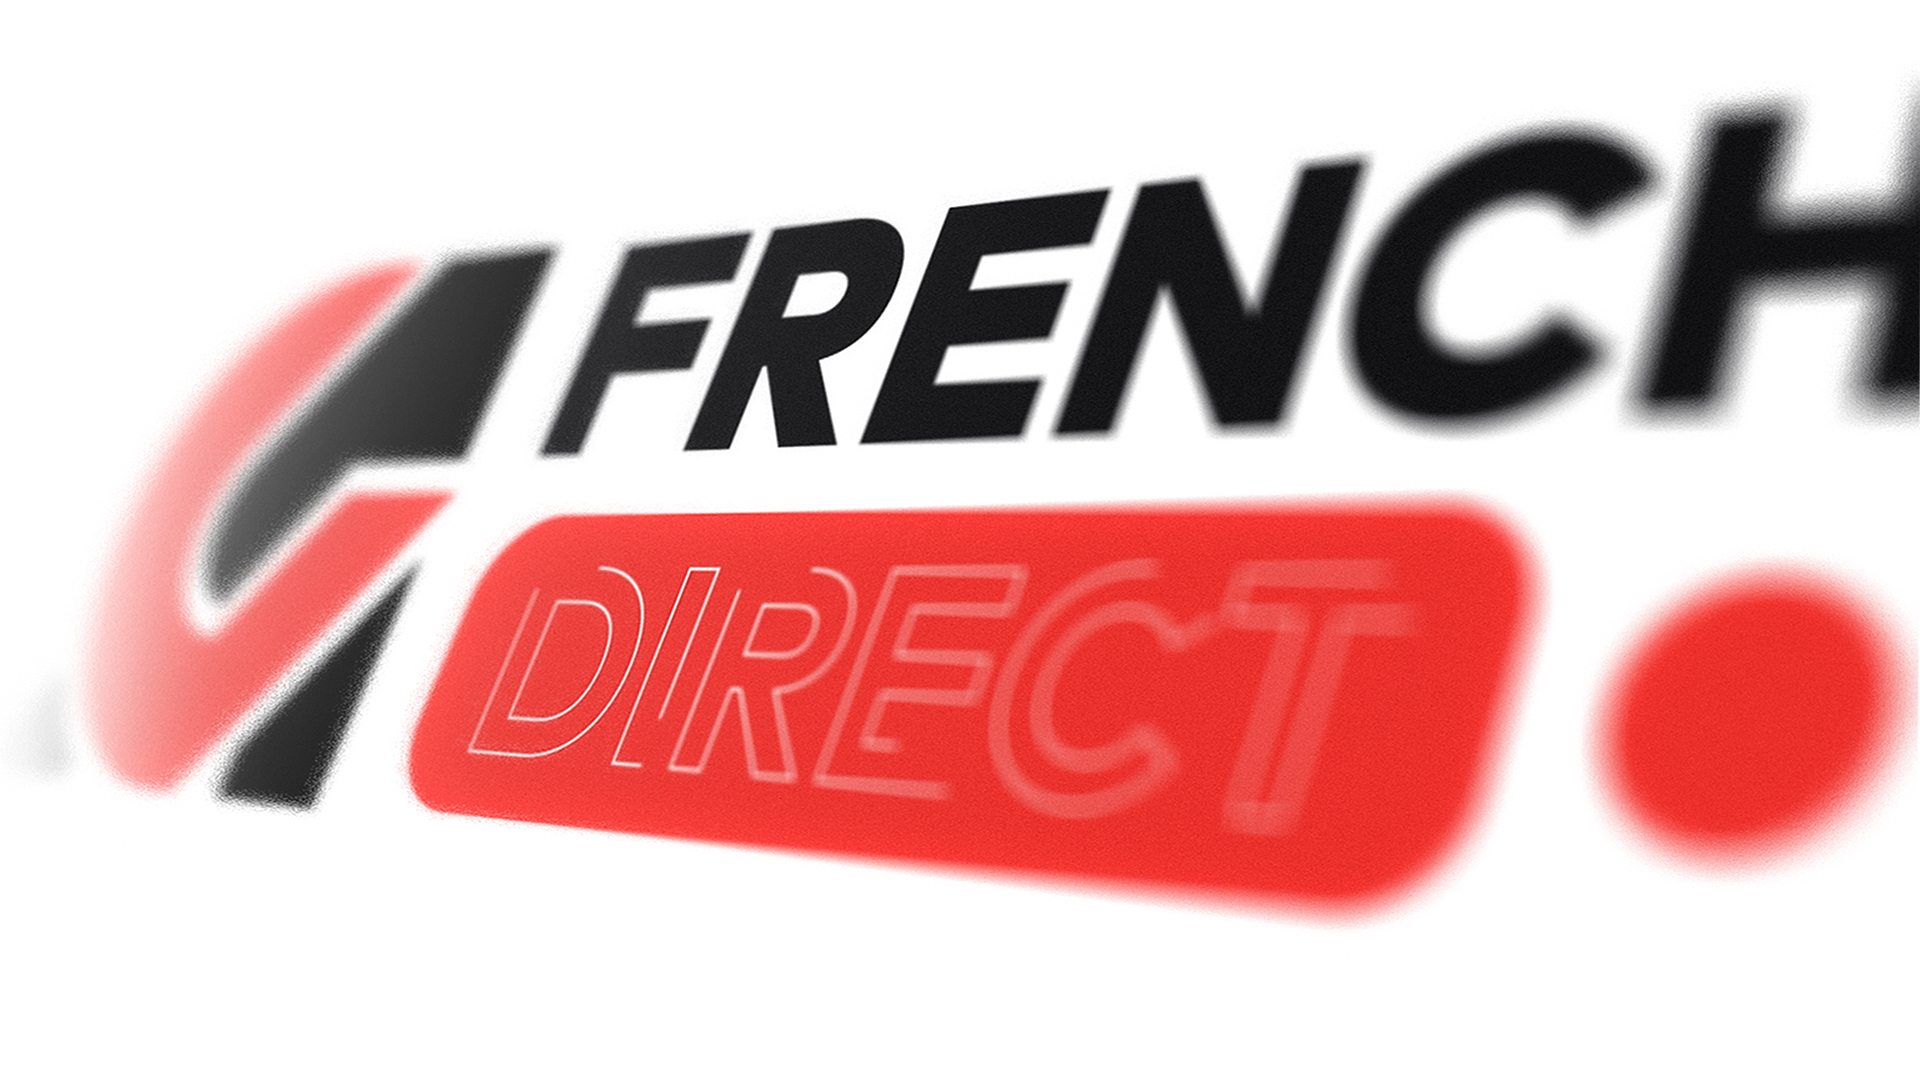 Ag french direct agfd illustration